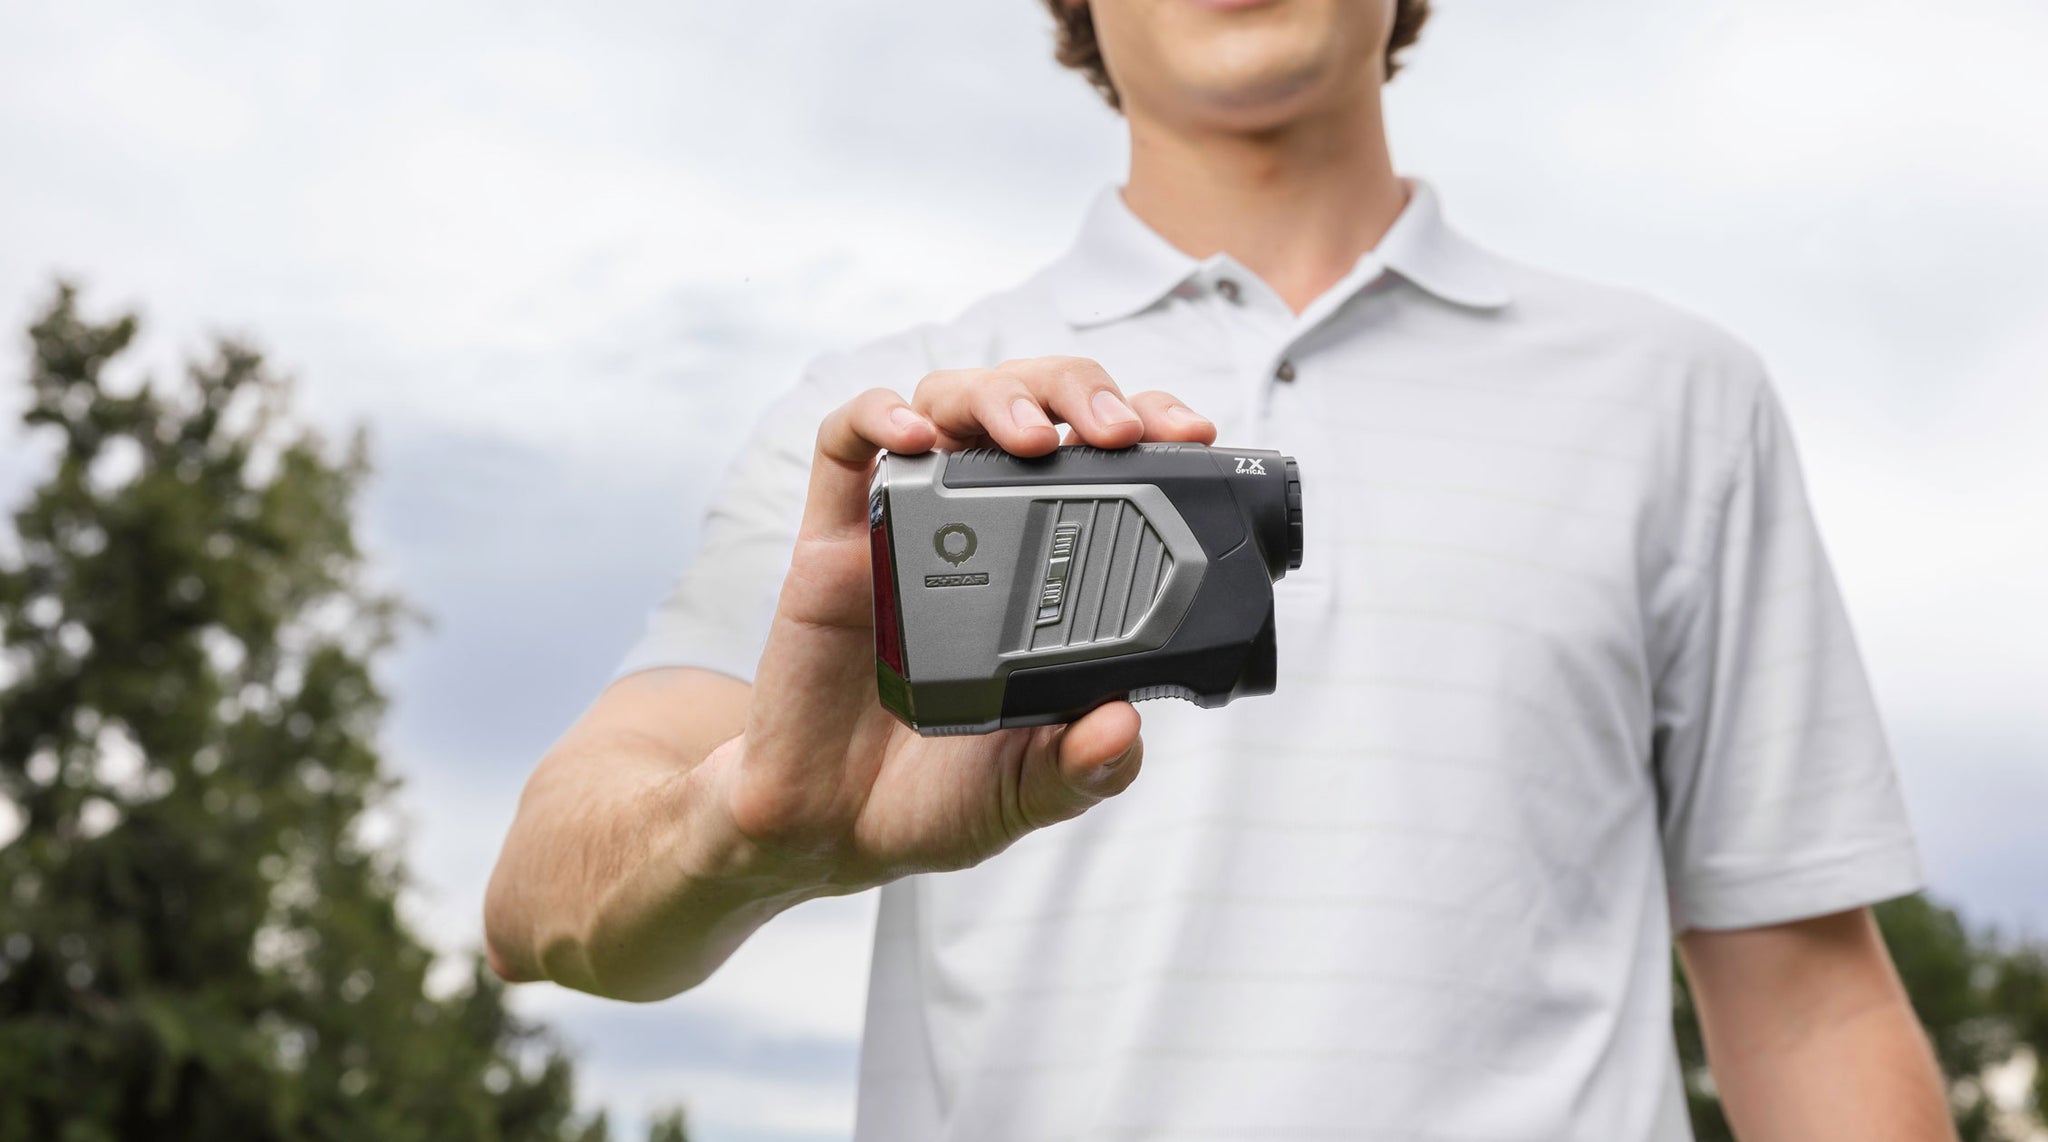 What Are the Benefits of Using a Golf Rangefinder?